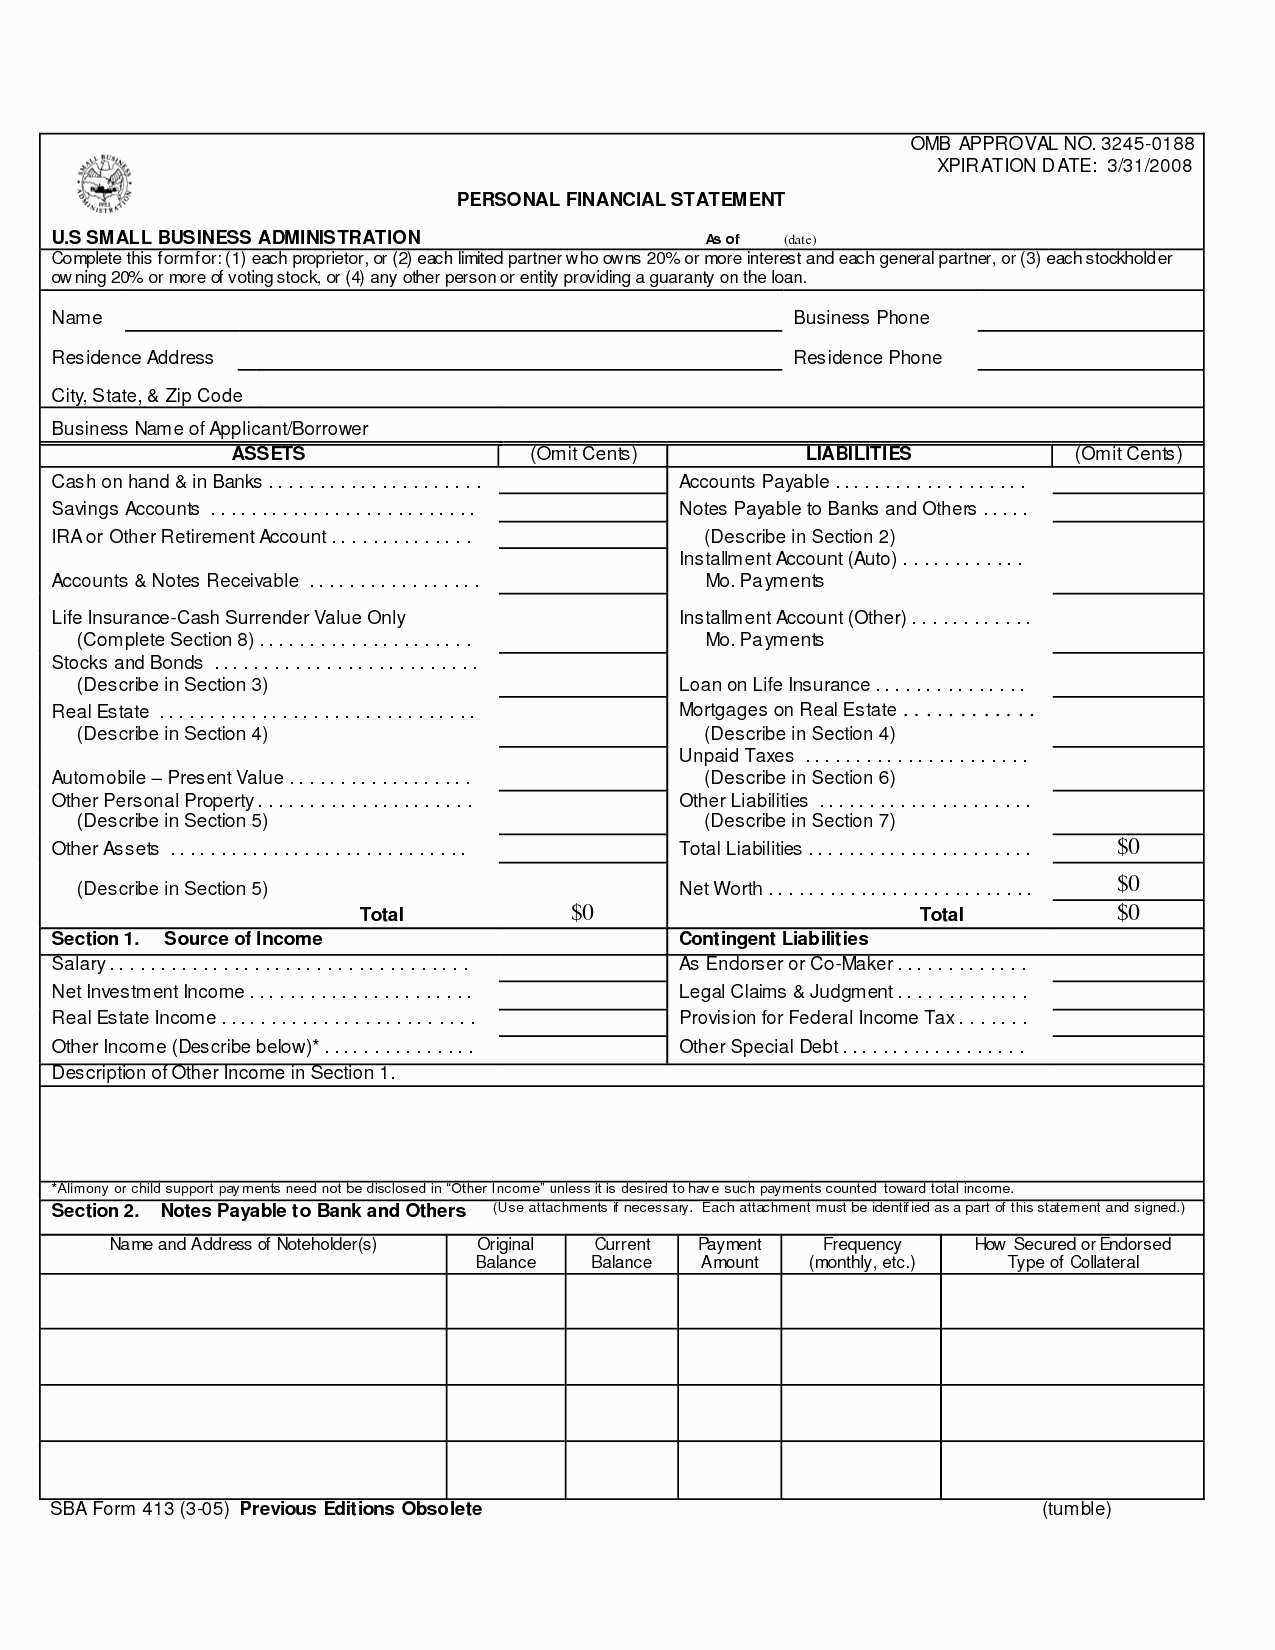 Invest In Yourself Worksheet Answer Key as Well as 16 Elegant Real Estate Investment Plan Template